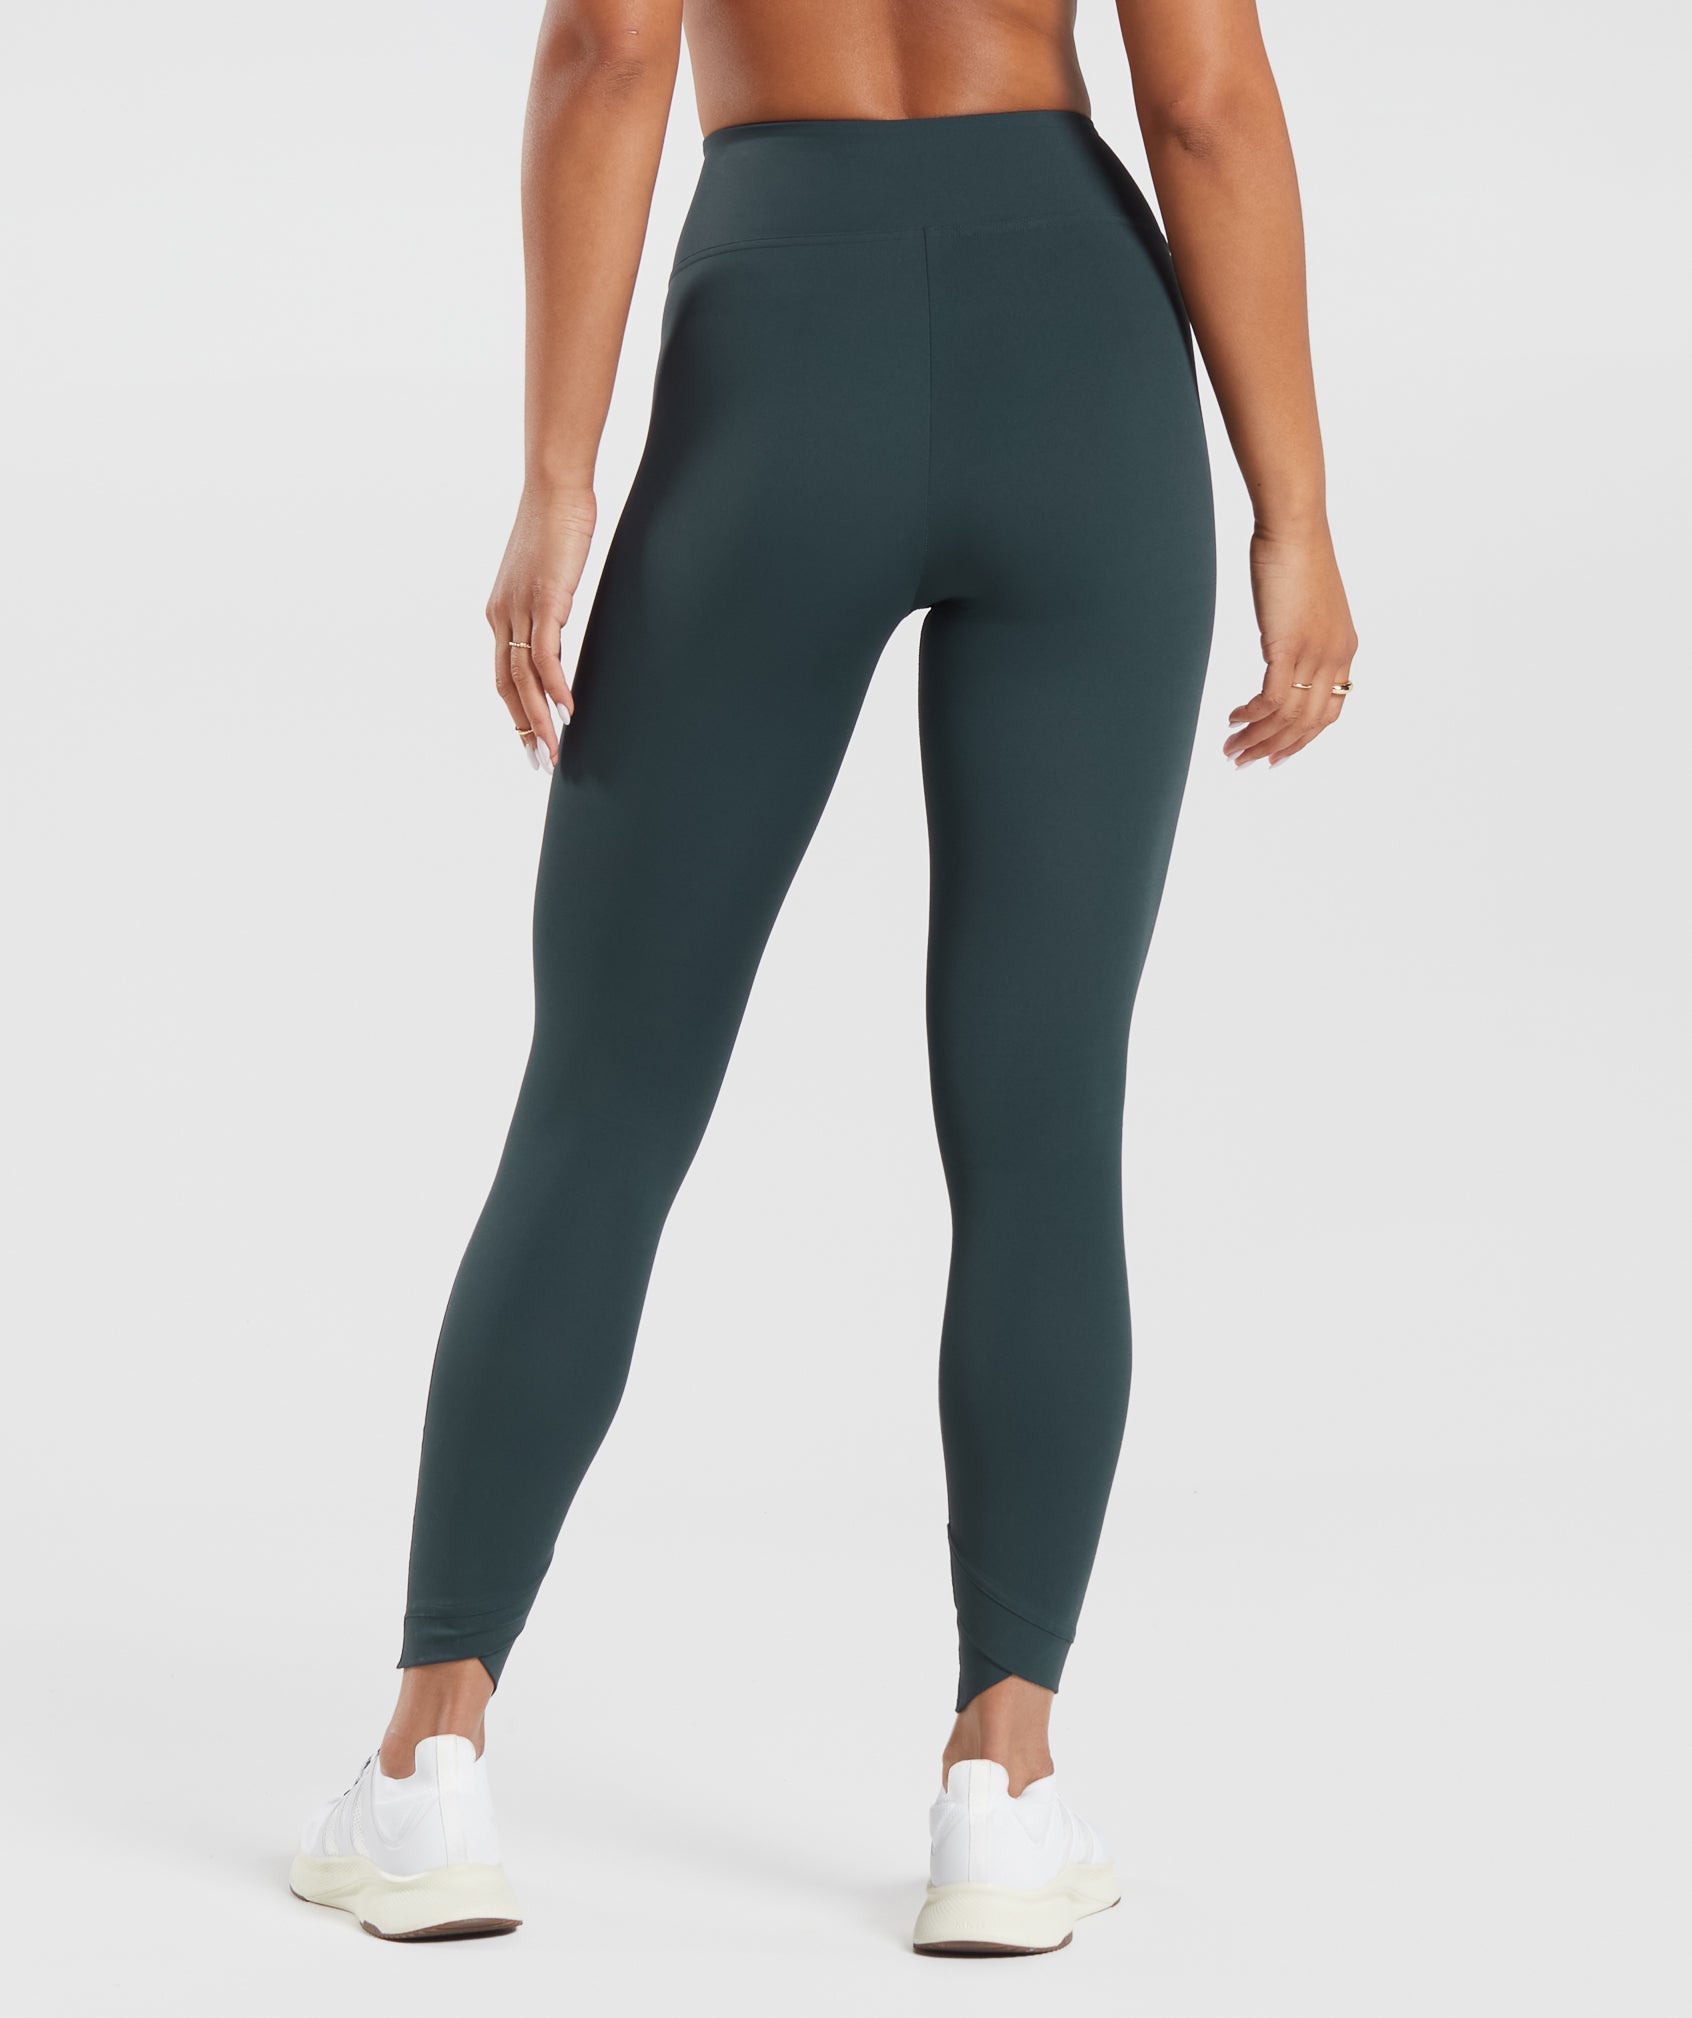 The Amplify Seamless Leggings, Deep Teal/ Black Marl. #Gymshark #Womens  #Fitness #Workout #Comfy